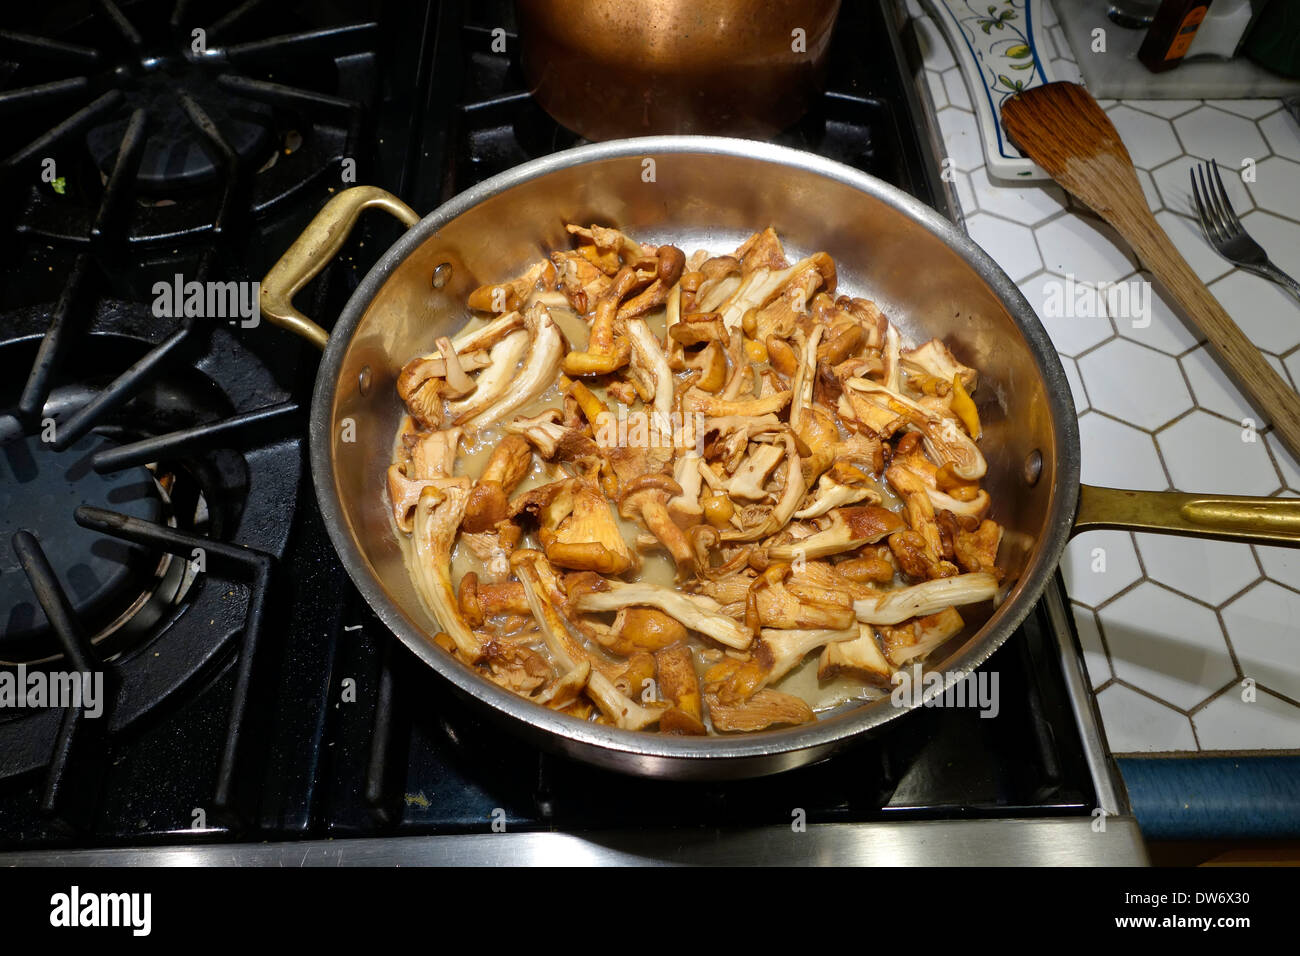 Frying pan of chanterelle mushrooms cooking on a gas range. Stock Photo